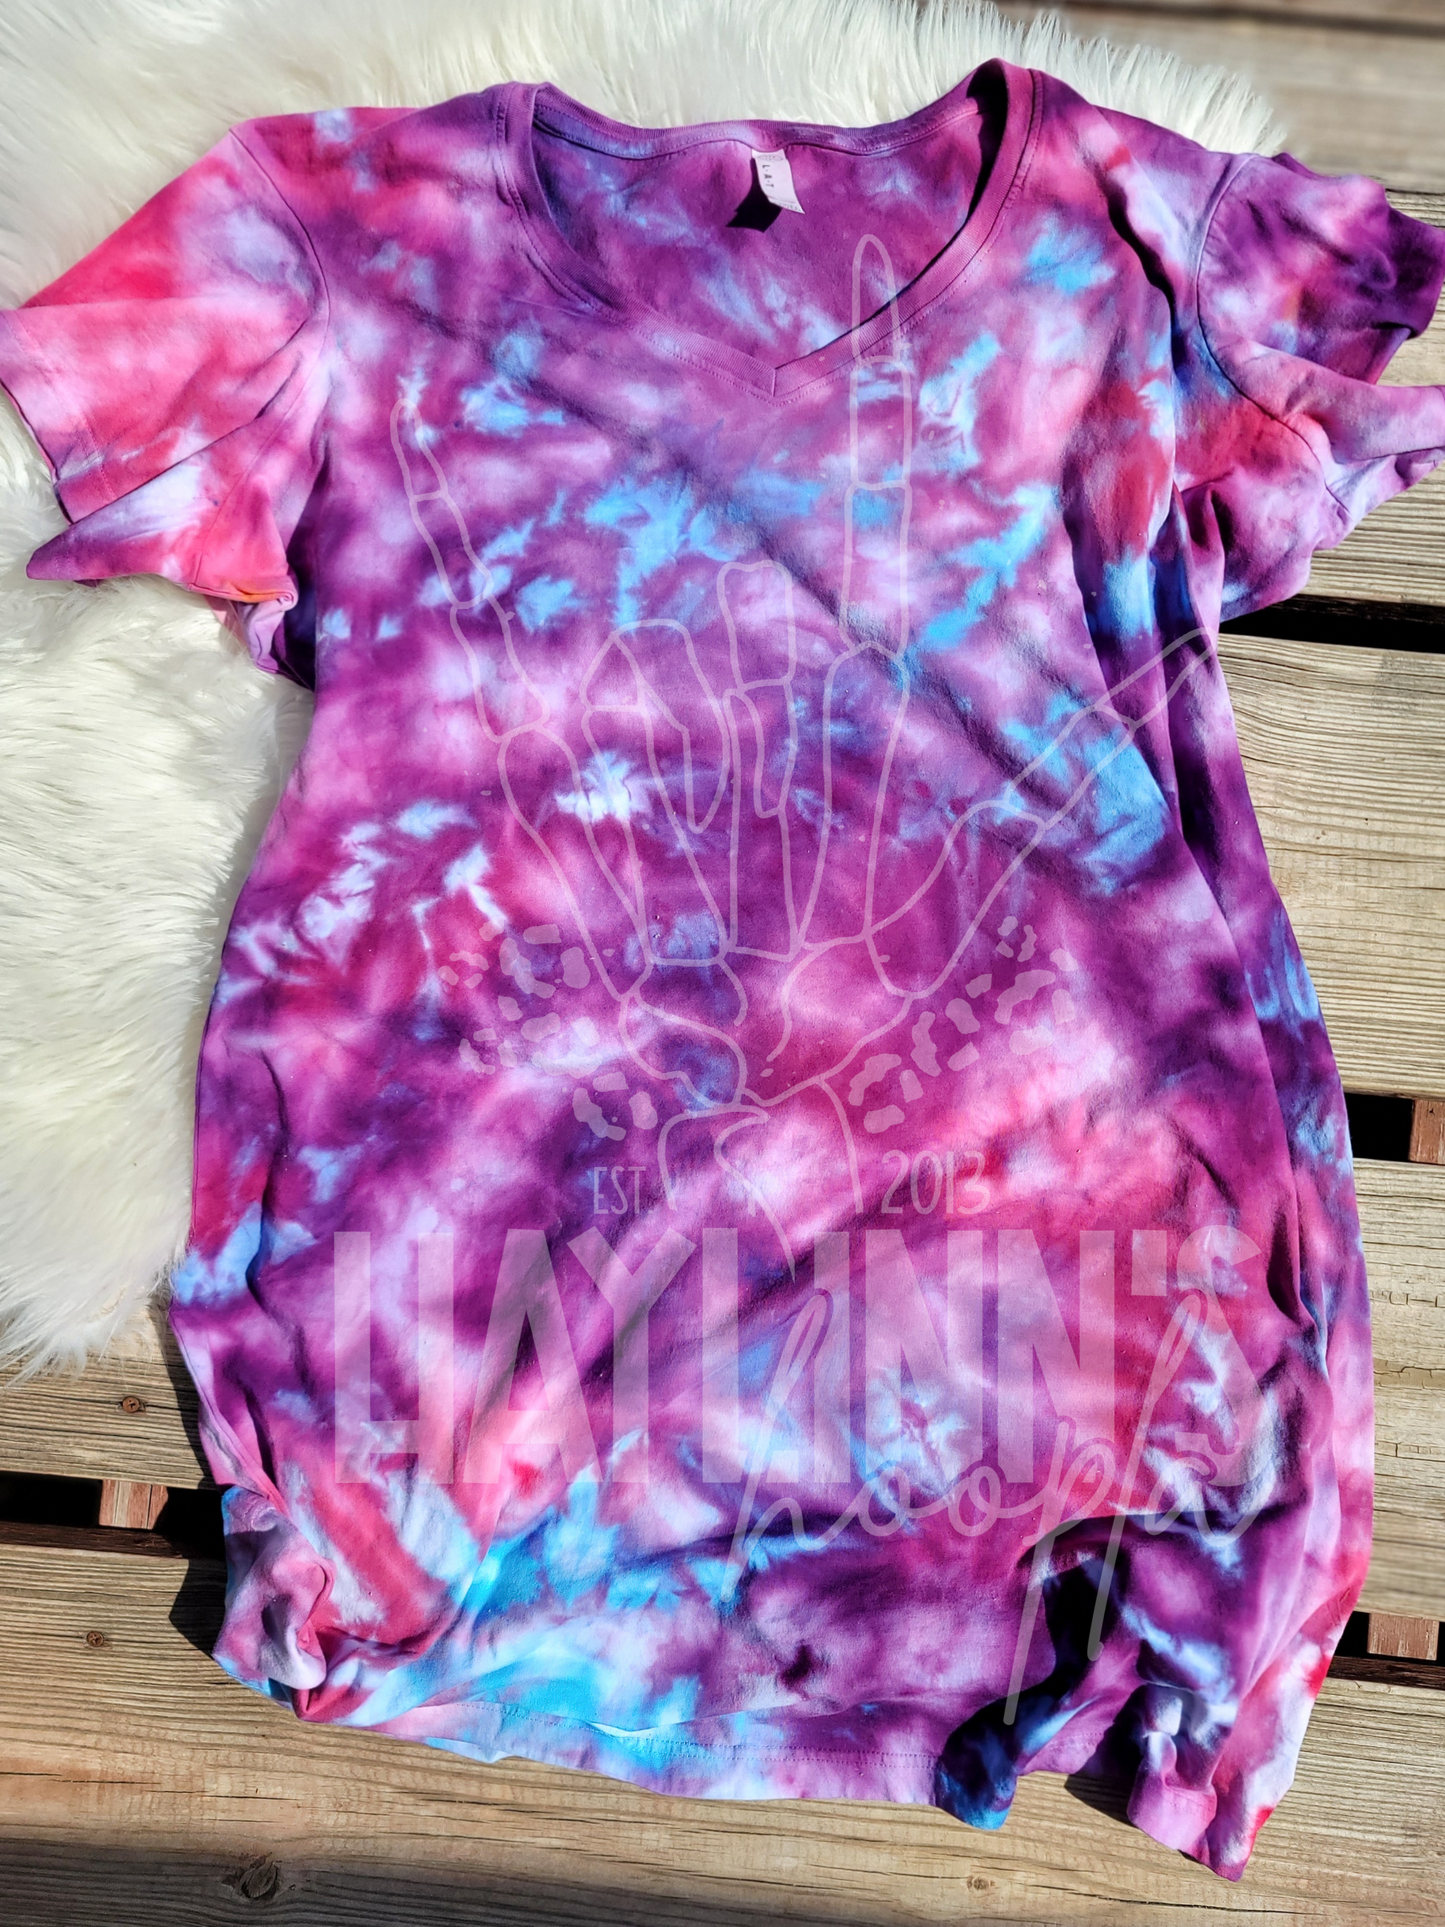 Ice Dyed T-Shirt Dress/Cover Up